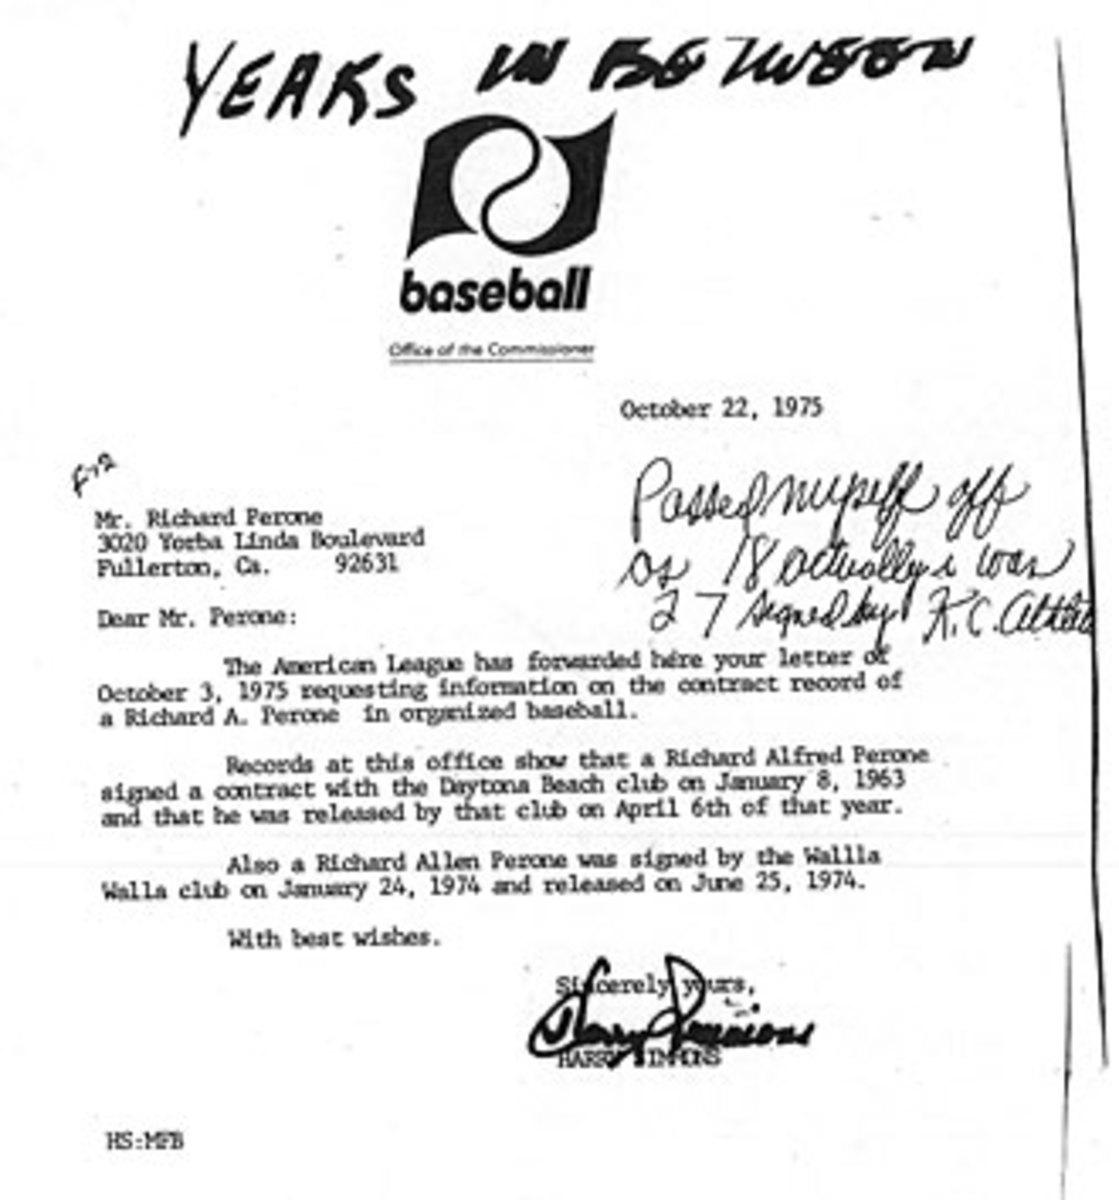 On a 1975 letter from the commissioner's office detailing the dates he was under contract, Pohle wrote "Passed myself off as 18 actually was 27 signed by K.C. Athletics."